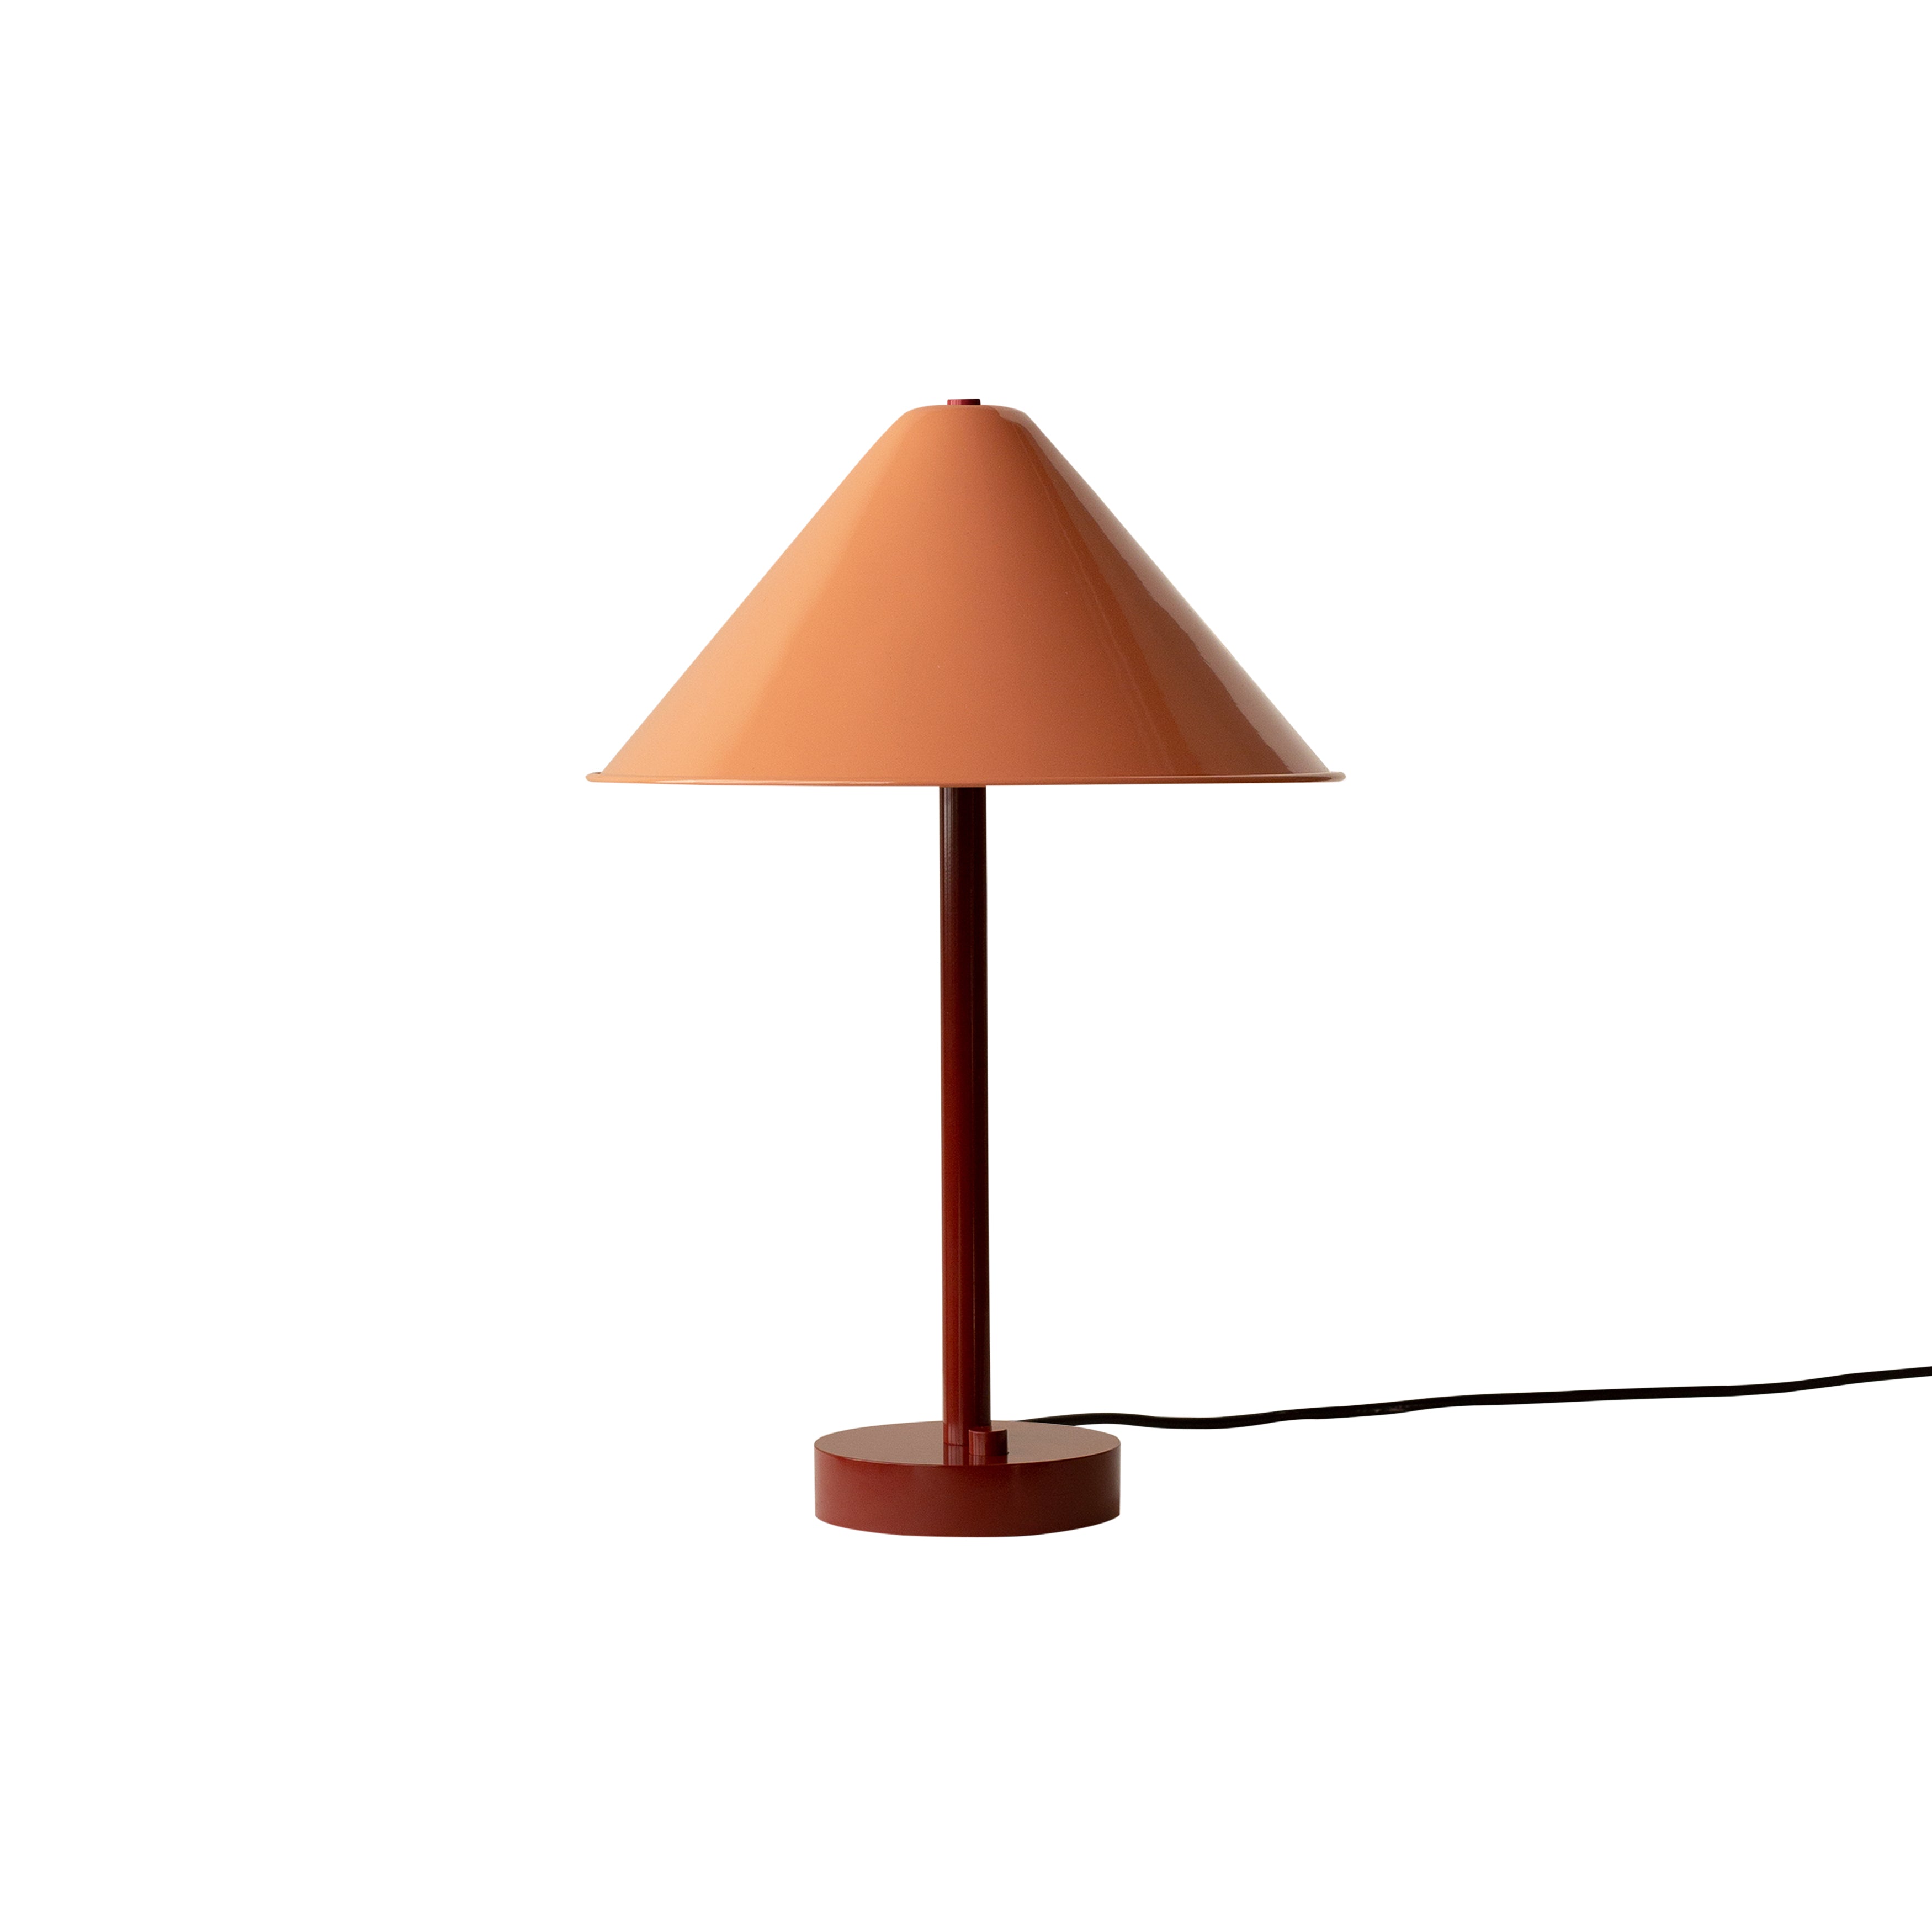 Tipi Table Lamp: Peach + Oxide Red